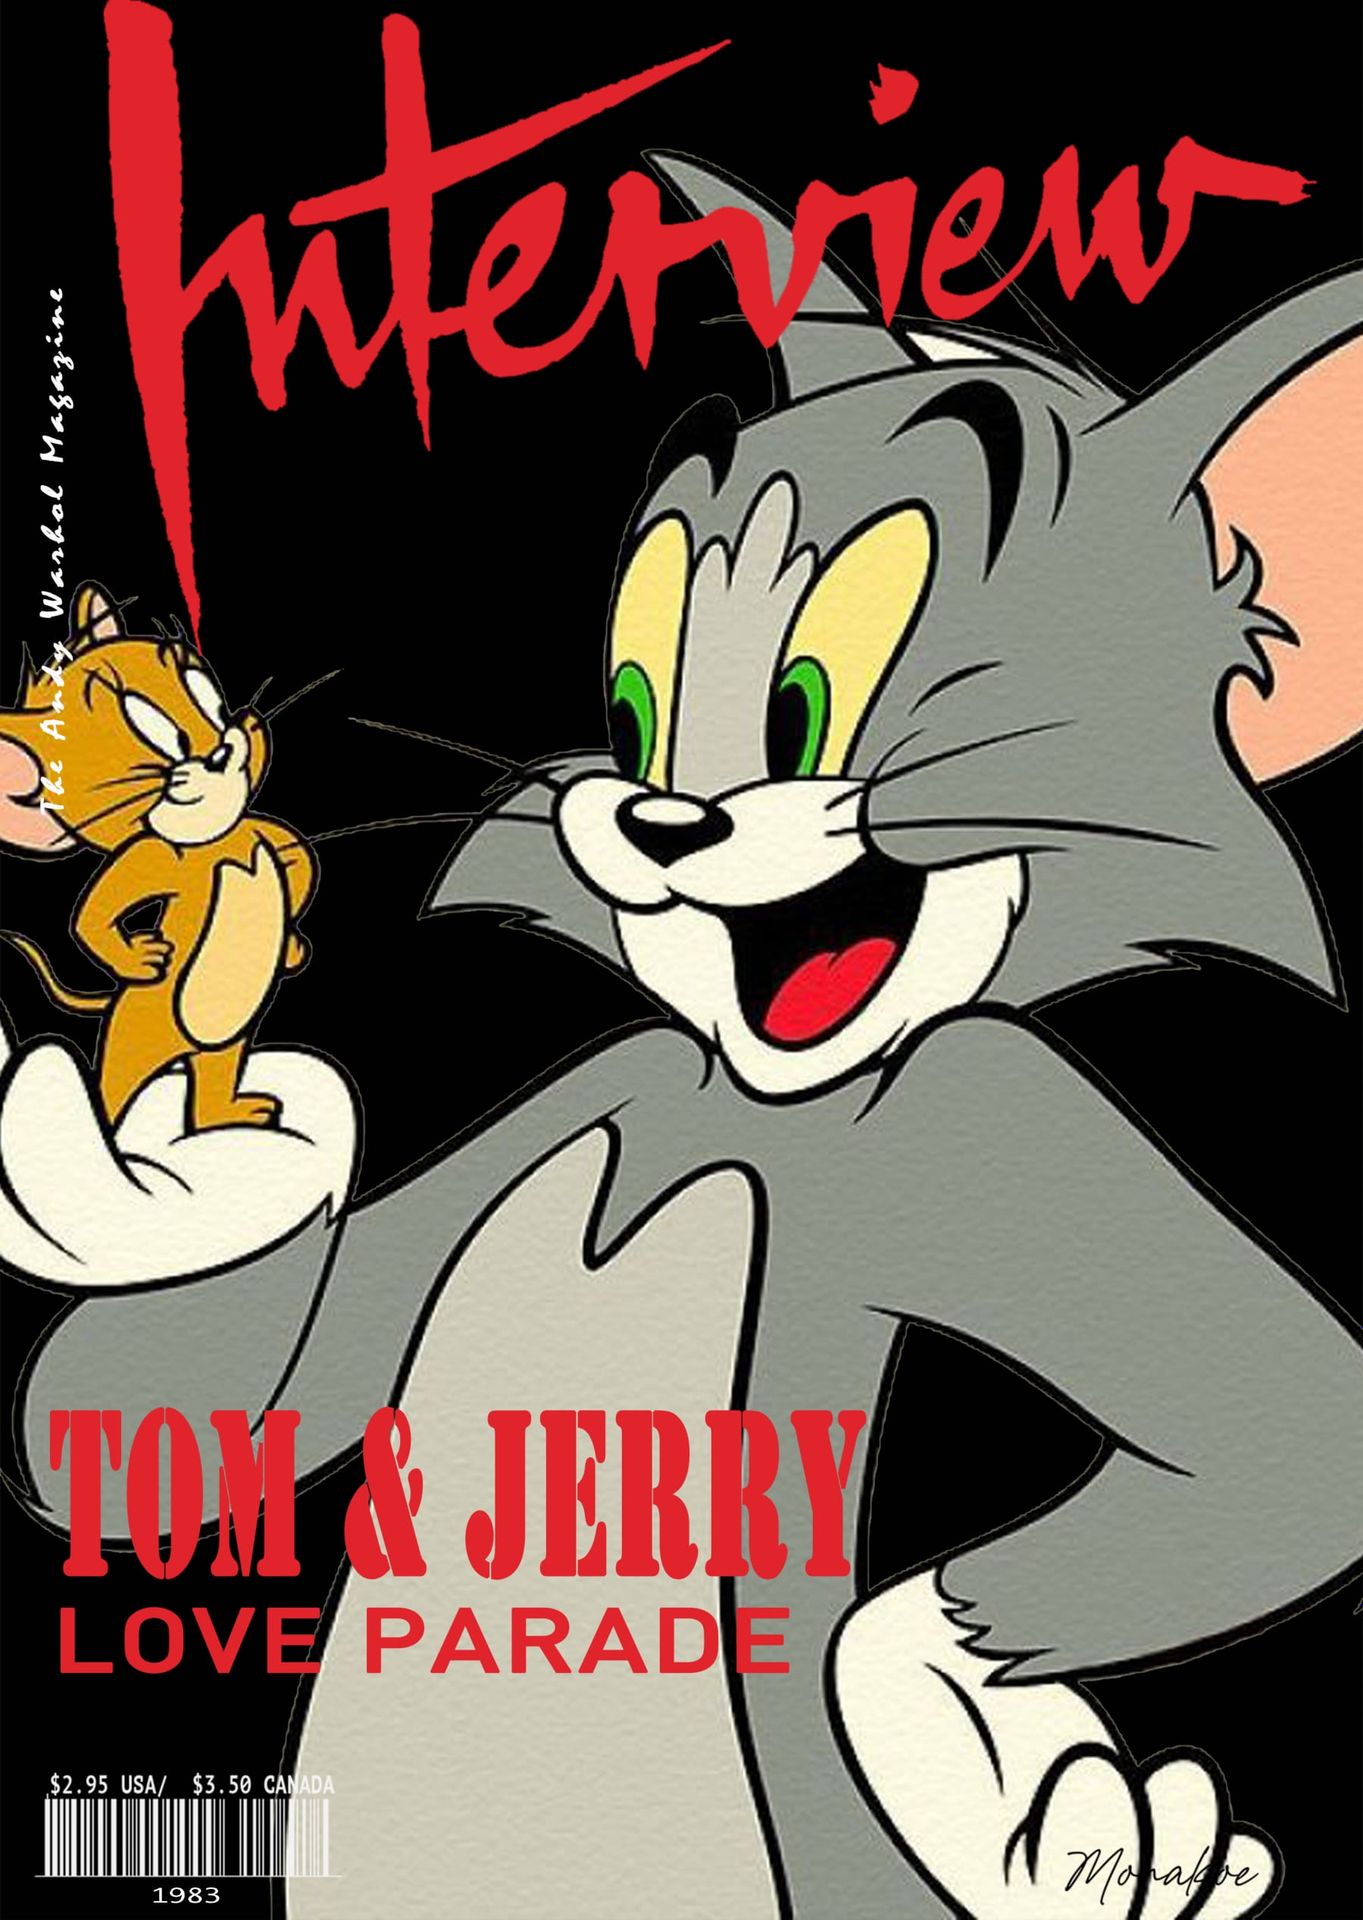 Null Interview the Andy Warhol Magazine (after), Tom&Jerry, Monakoe, printed on &hellip;